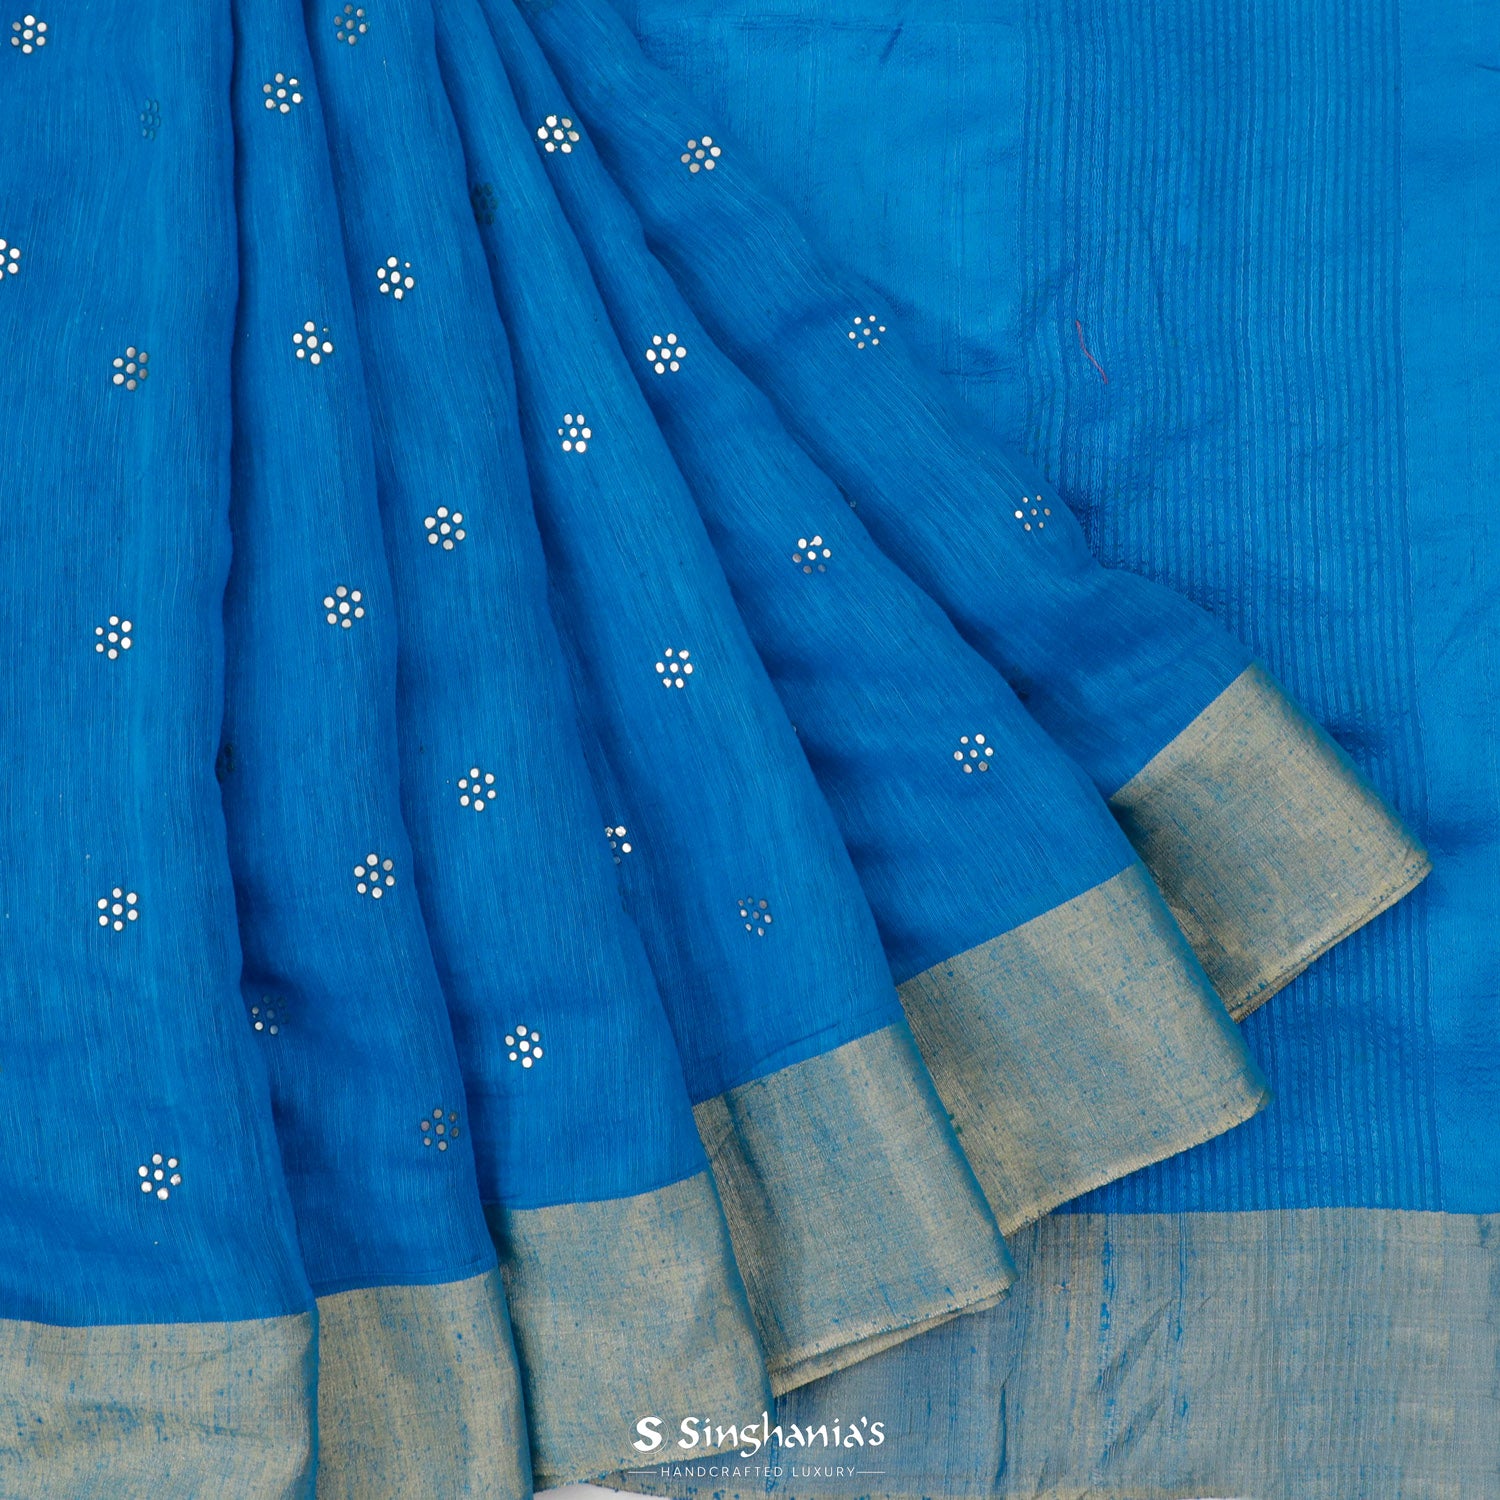 Sapphire Blue Linen Saree With Mukaish Work In Floral Butti Pattern